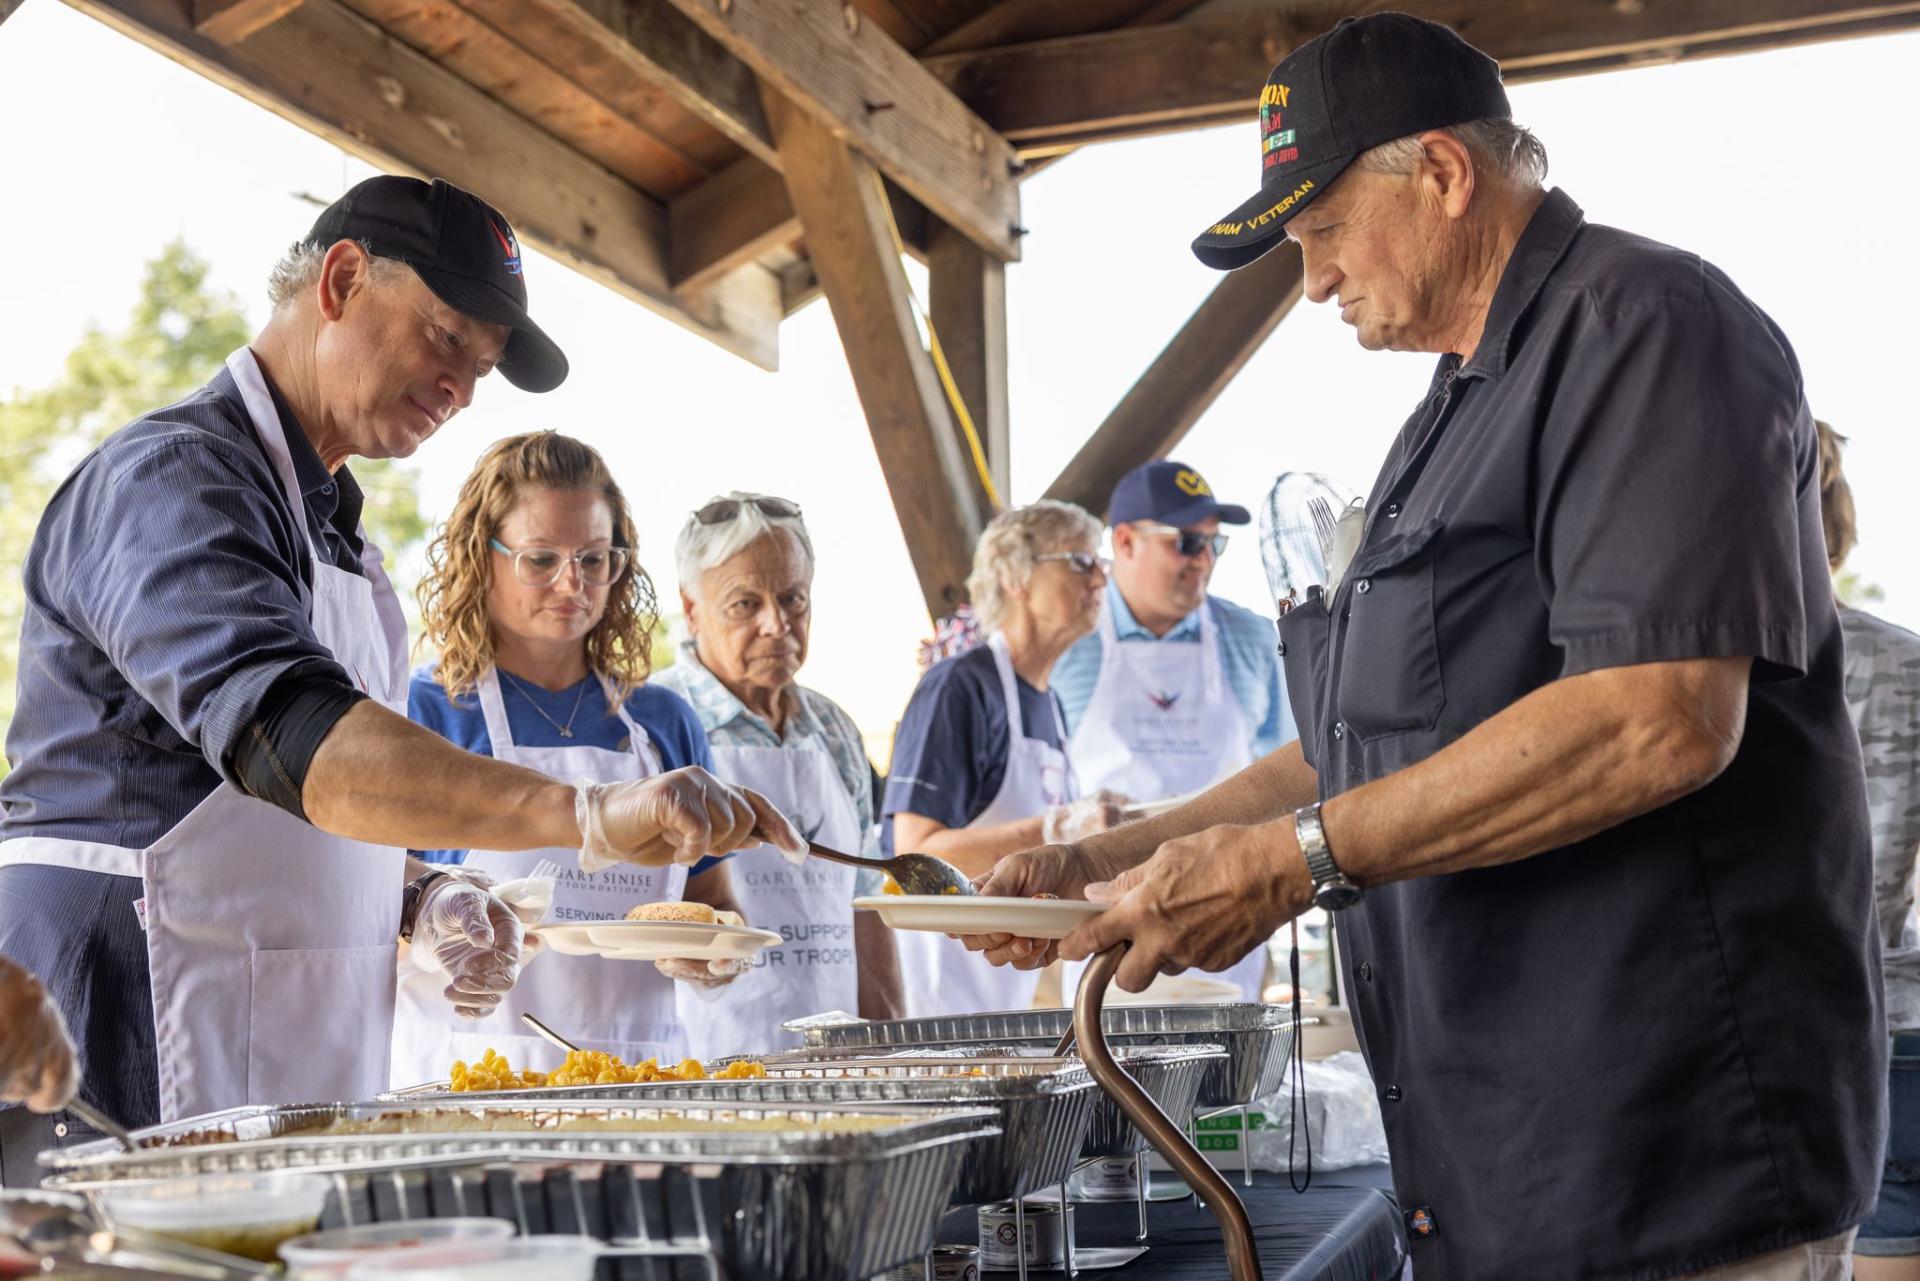 Gary Sinise Serves 1 Millionth Serving Heroes Meal on 4th of July